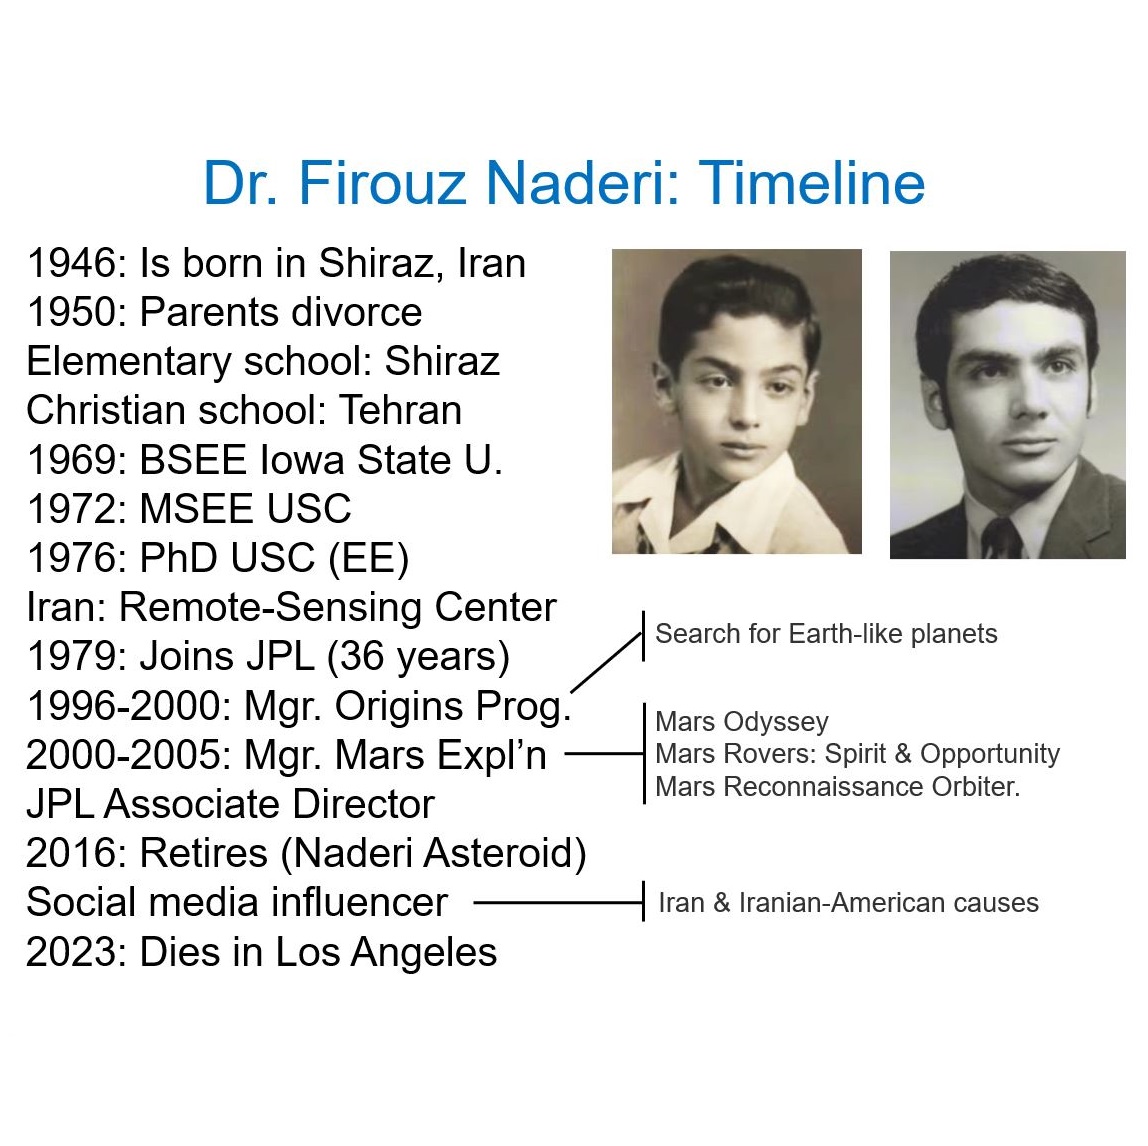 Remembering the late Dr. Firouz Naderi: A timeline of his life